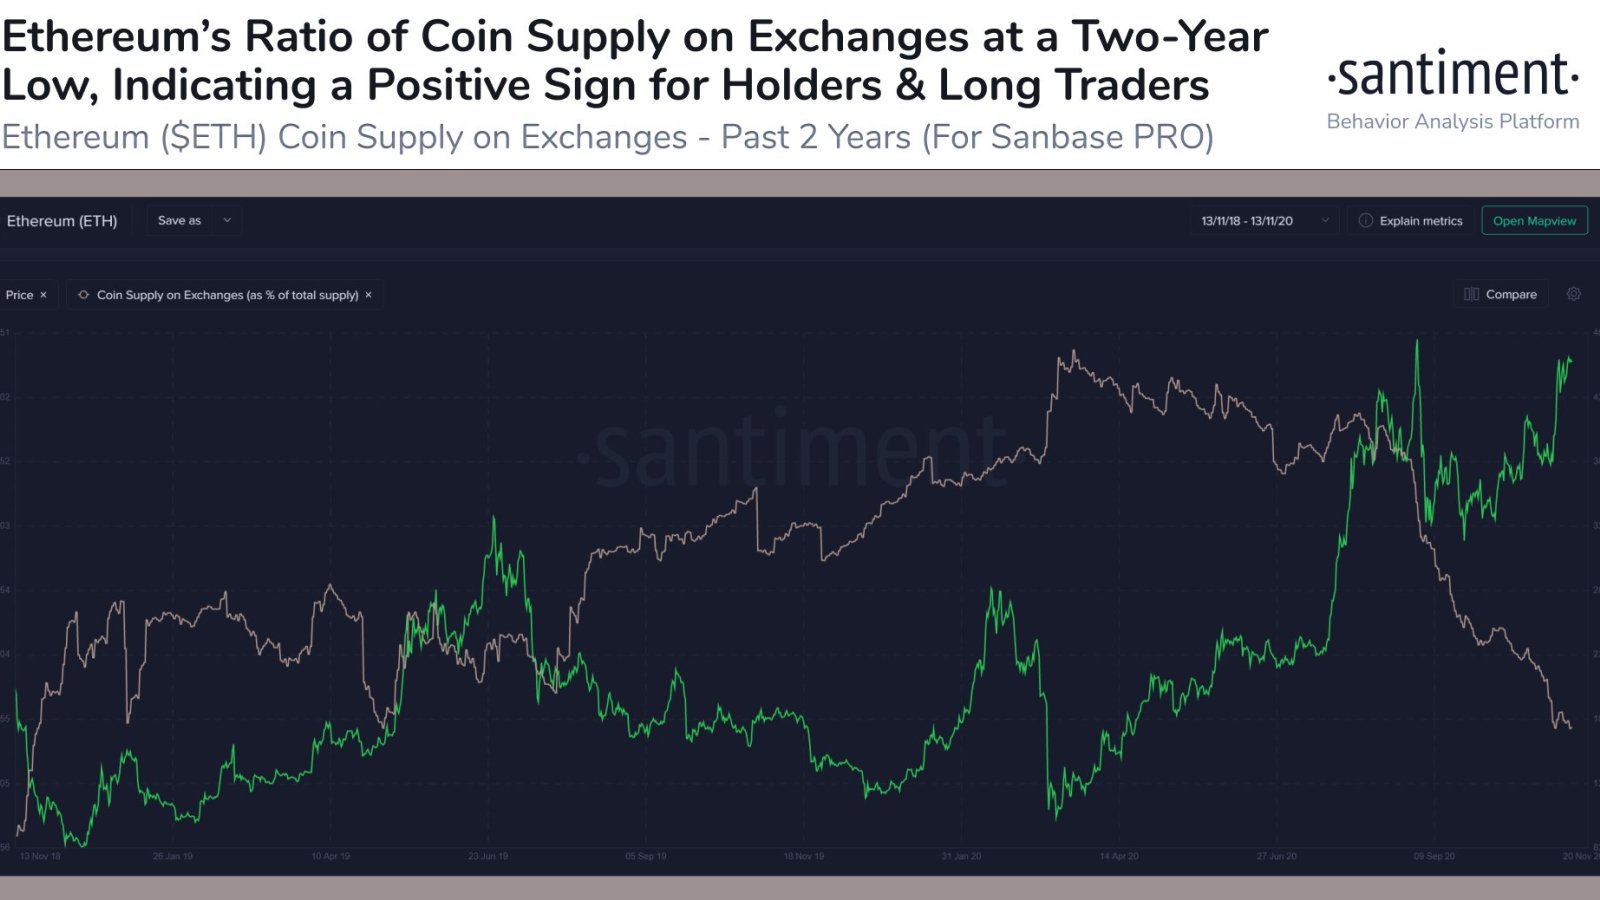 The ratio of Ethereum coin supply on exchanges